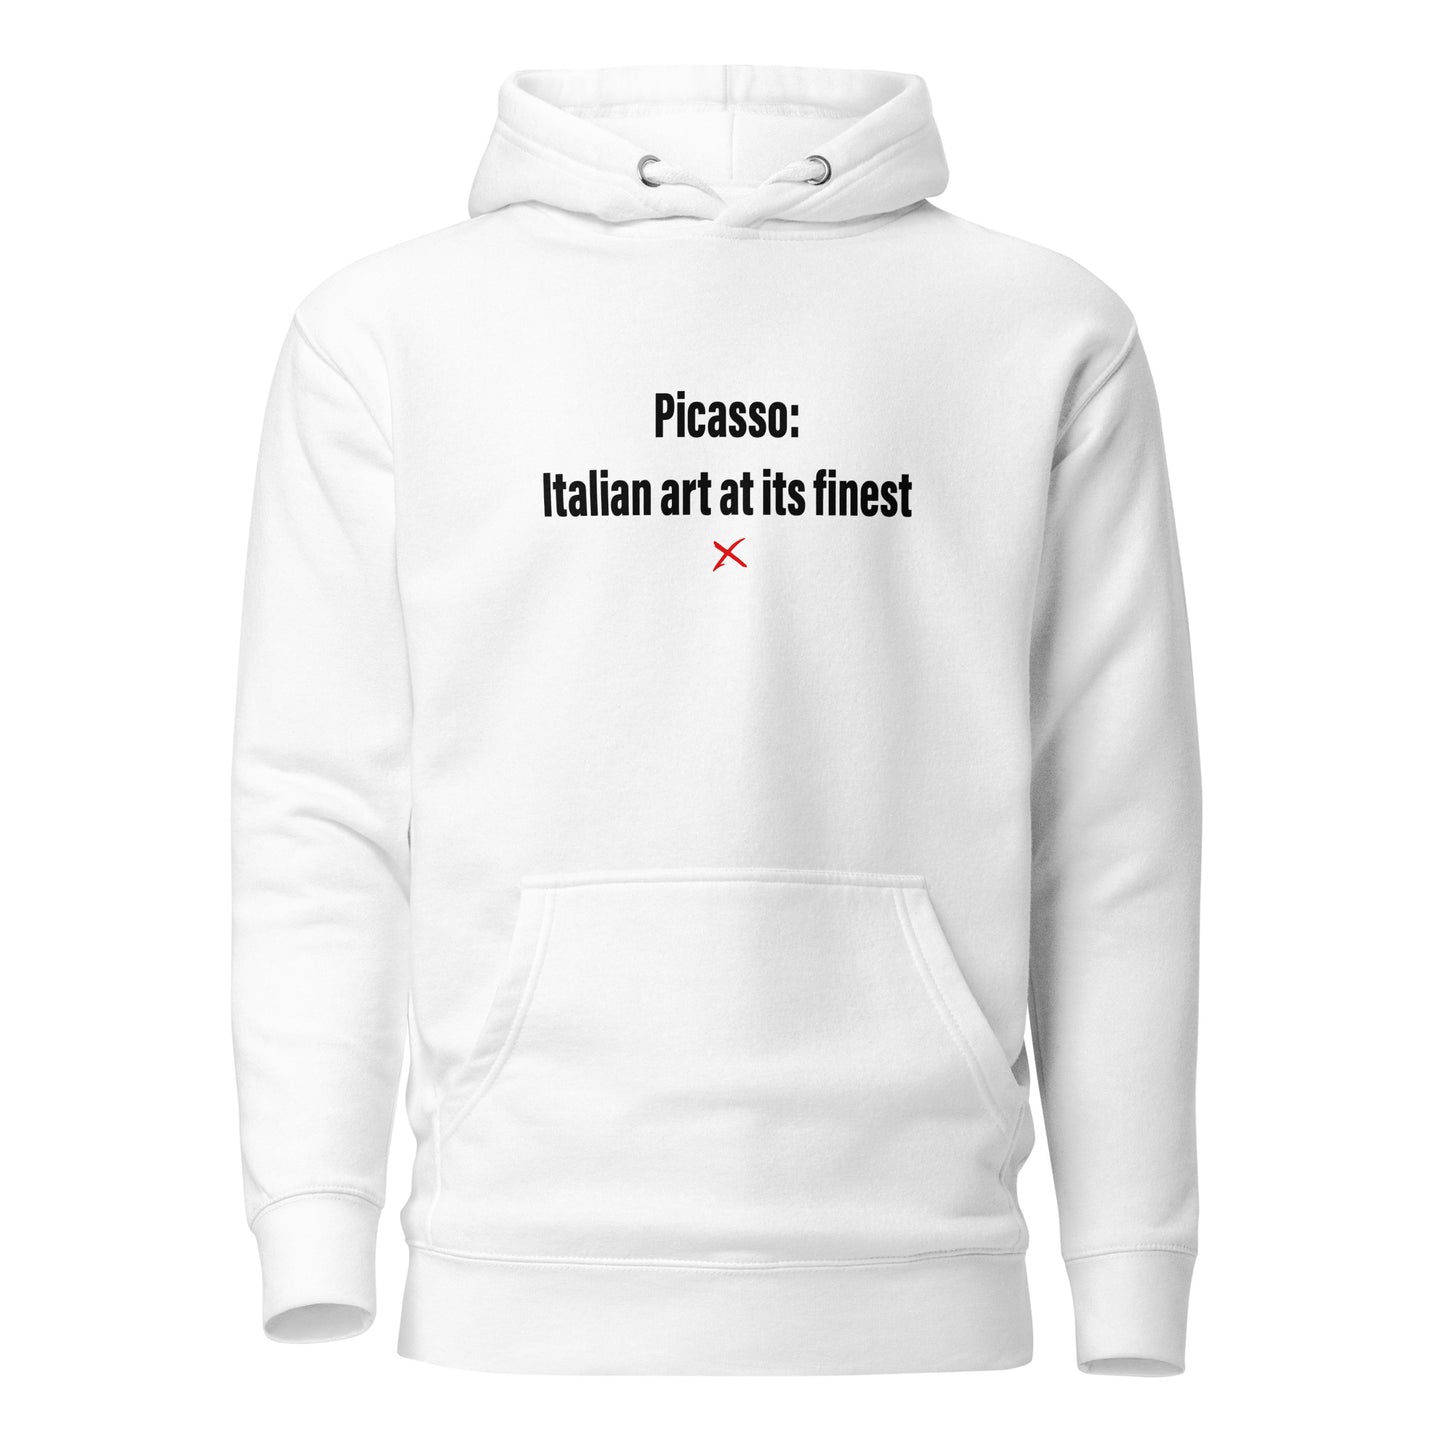 Picasso: Italian art at its finest - Hoodie